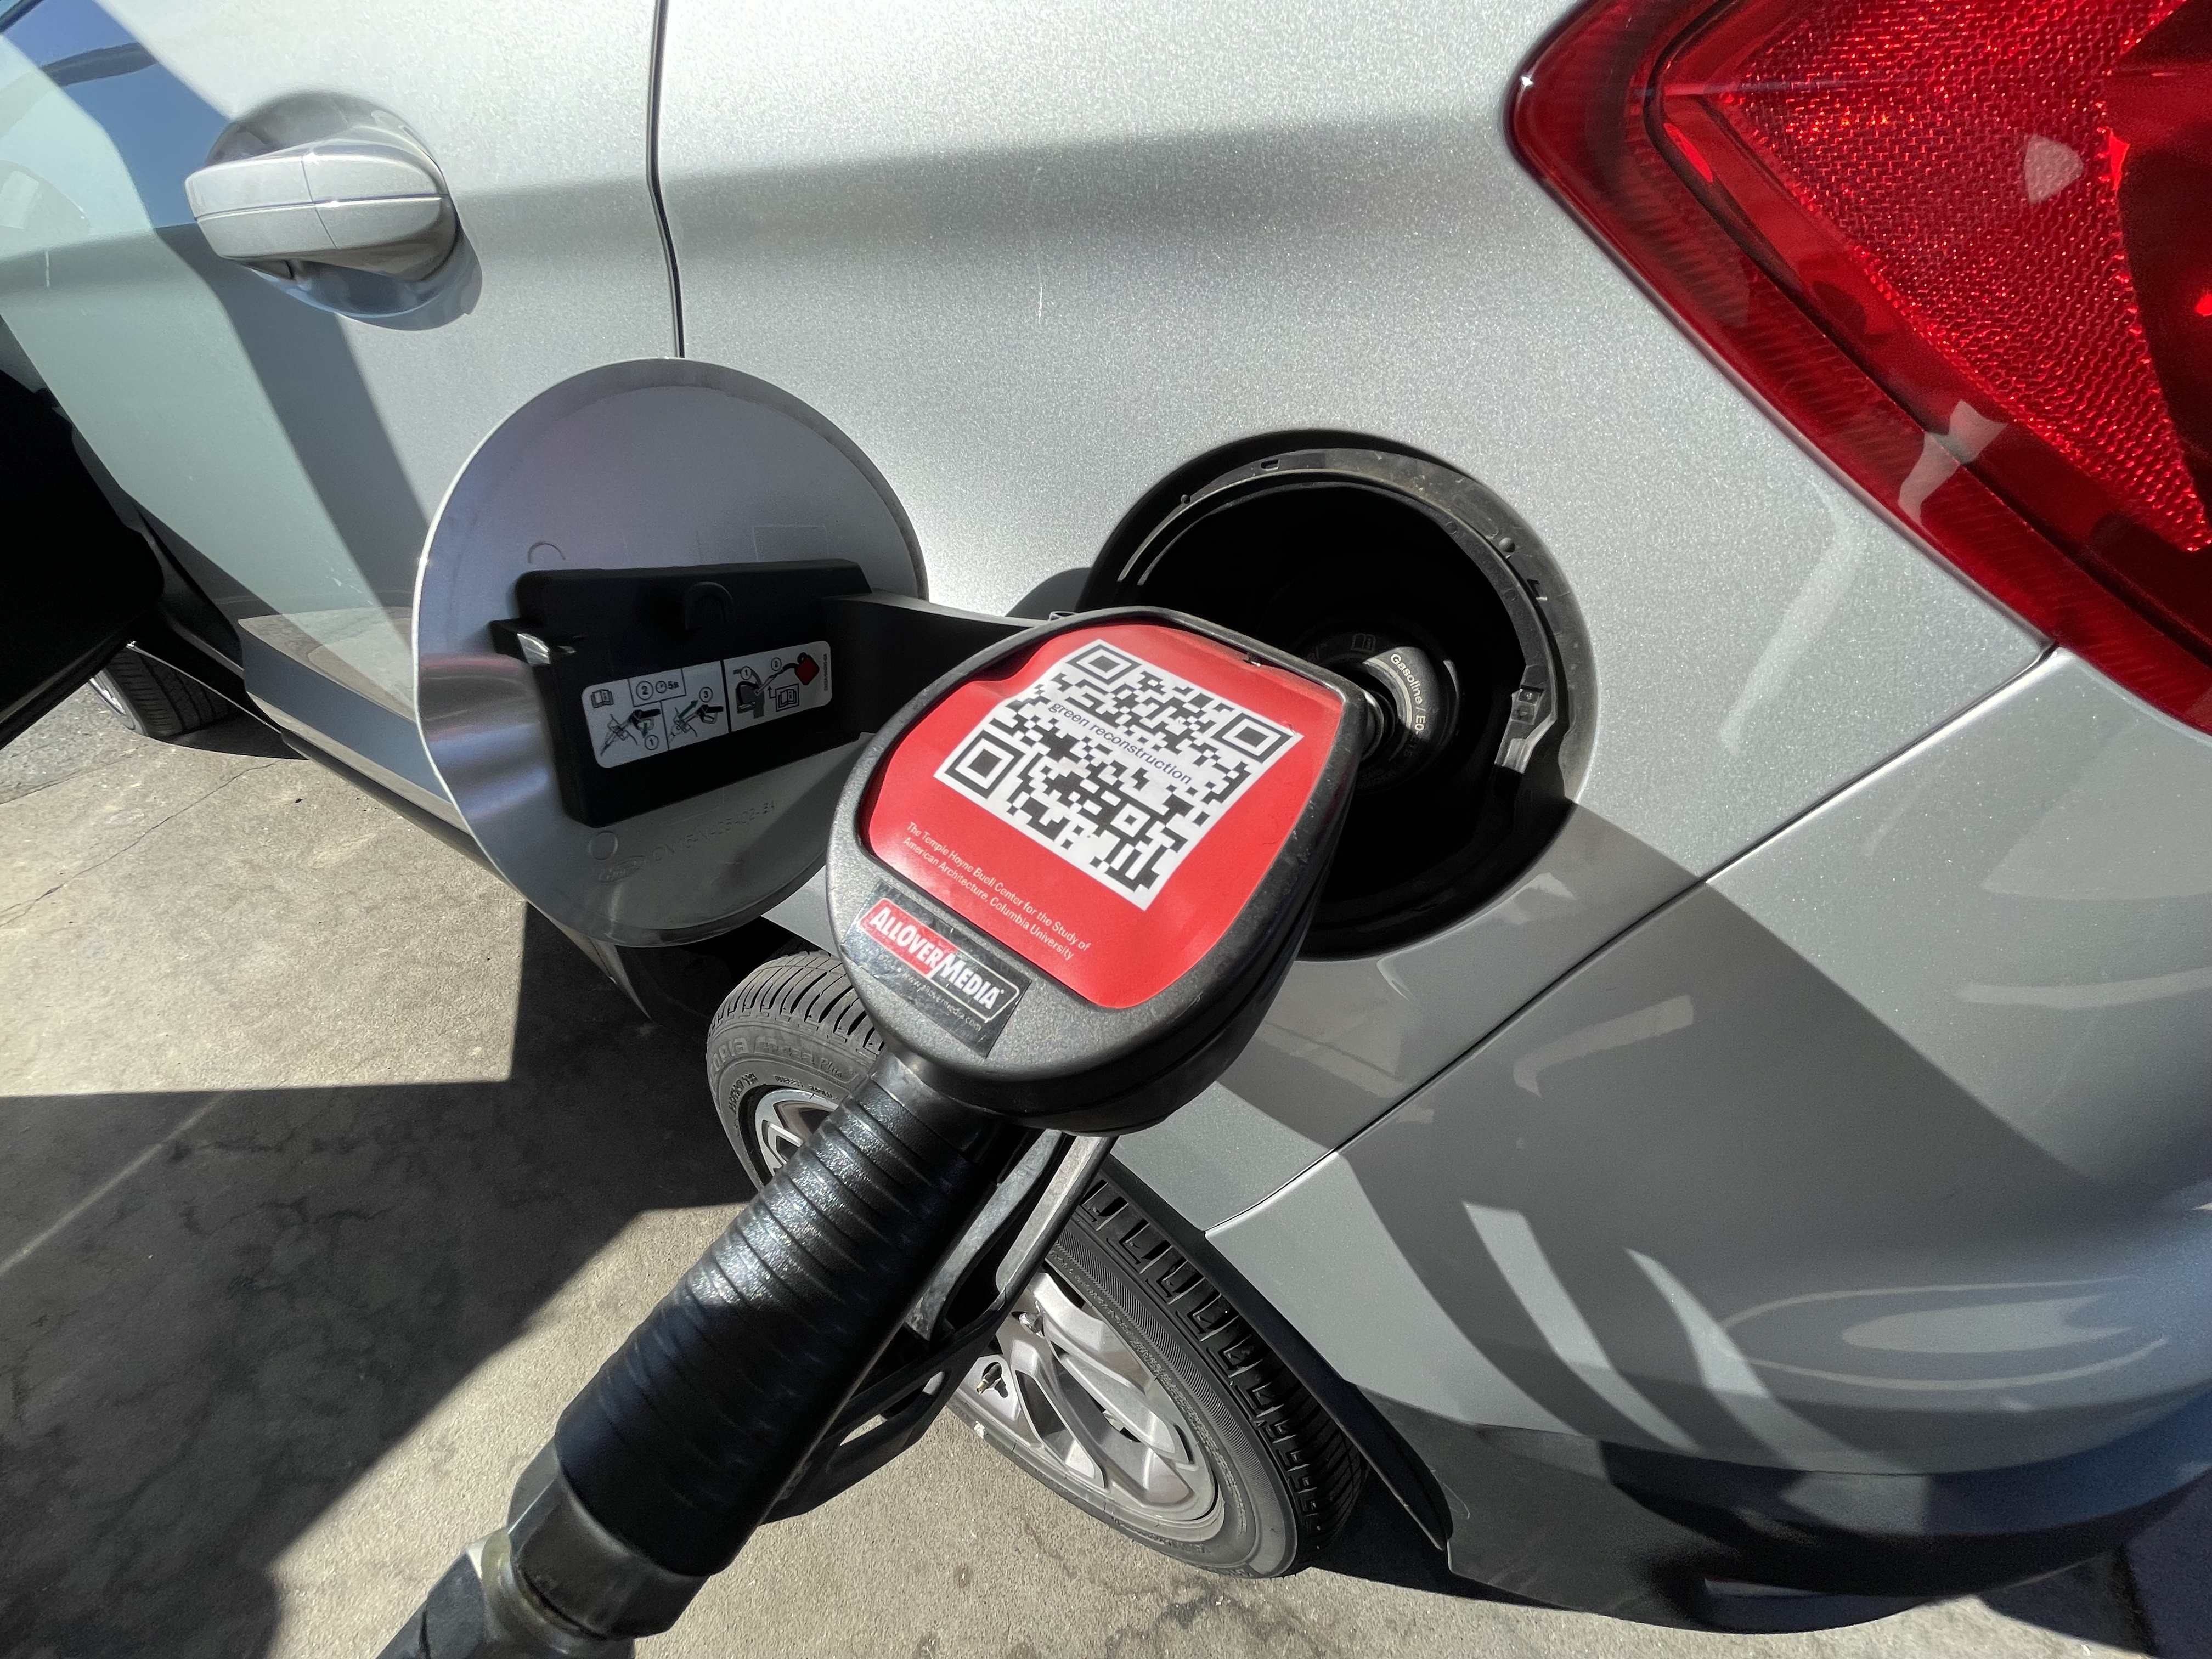 A gas pump pumping gas in a silver car. On the handle a A bright red frame surrounds a QR code